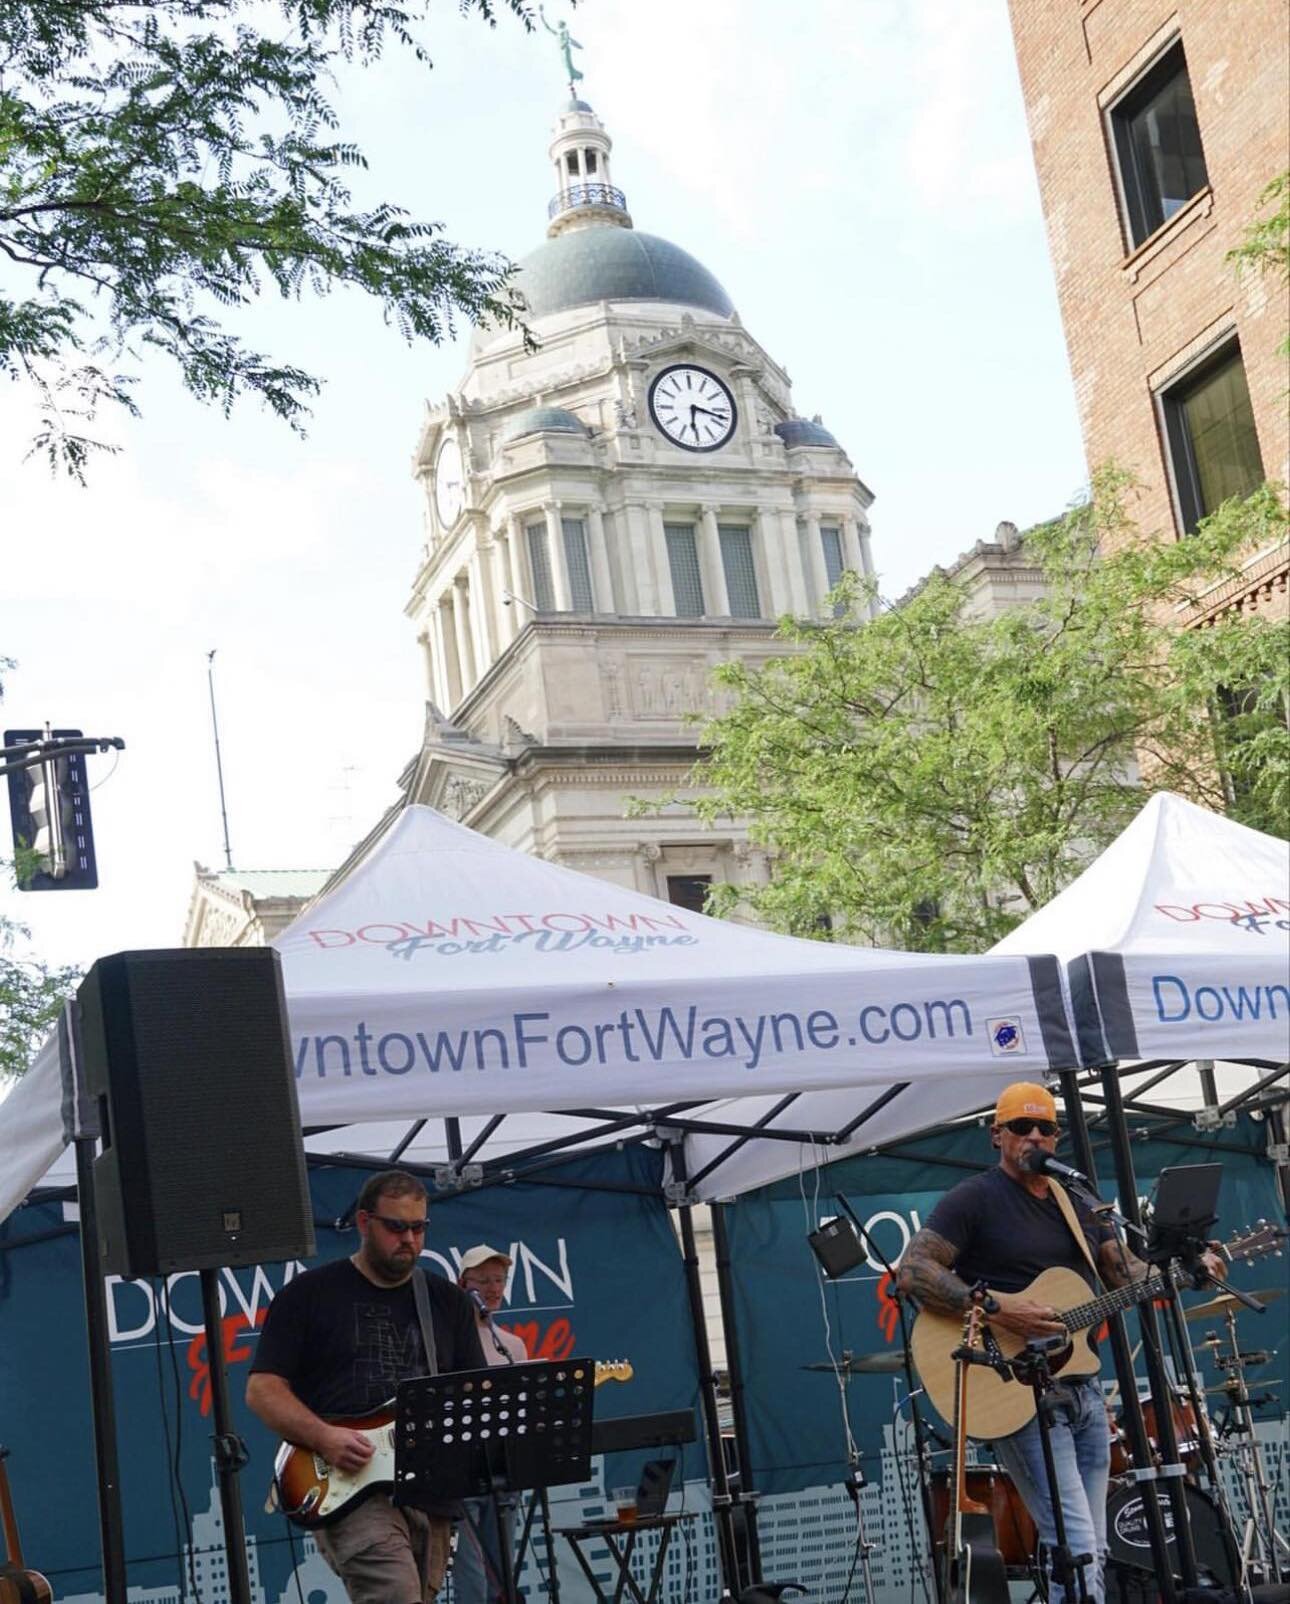 Experience live music every Friday evening until September 1 with the third annual summer concert series, Downtown Live, presented by Downtown Fort Wayne.